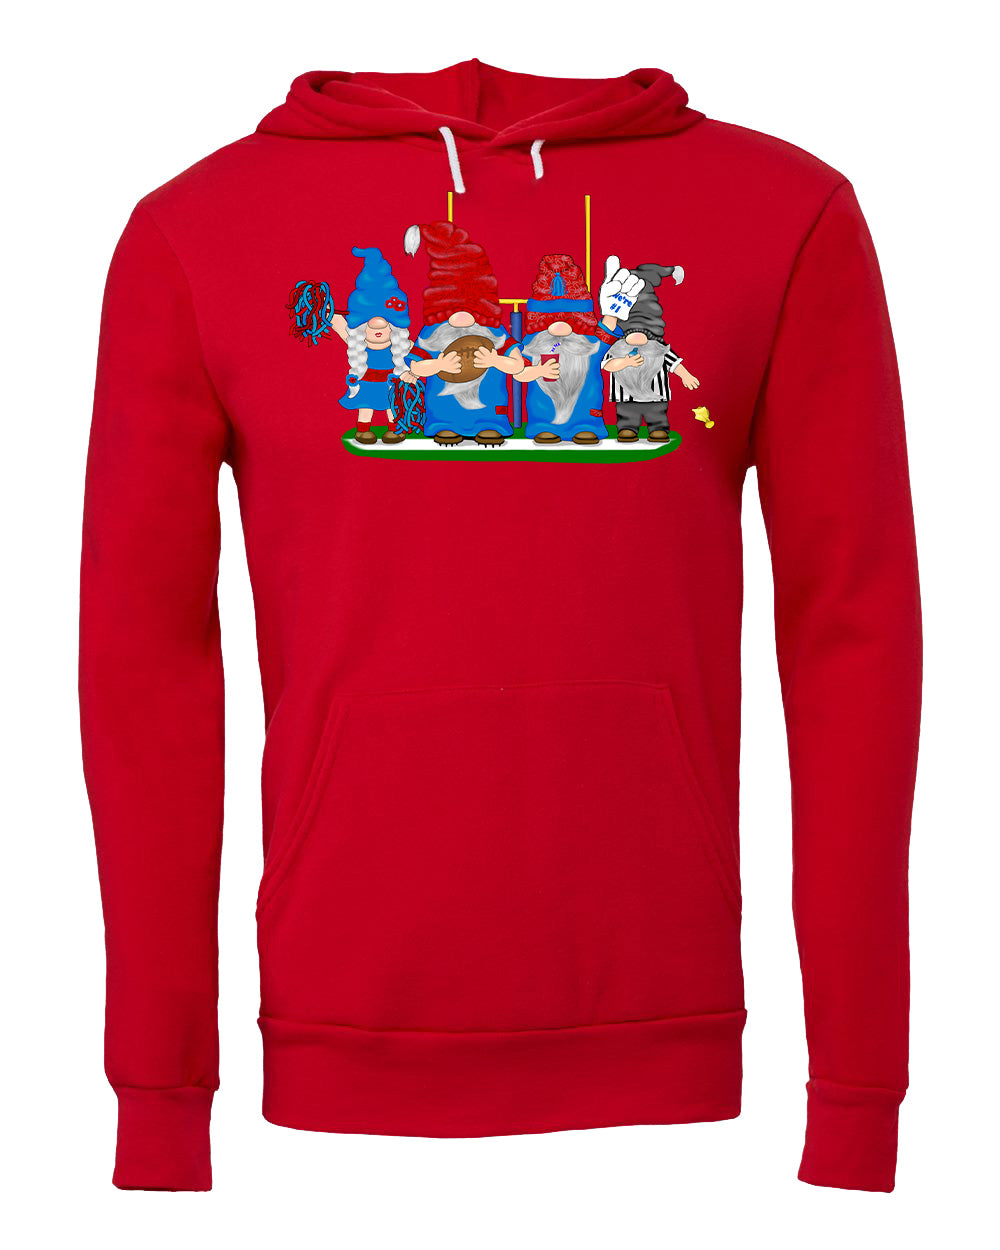 Red & Blue Football Gnomes (similar to NY) on Hoodie